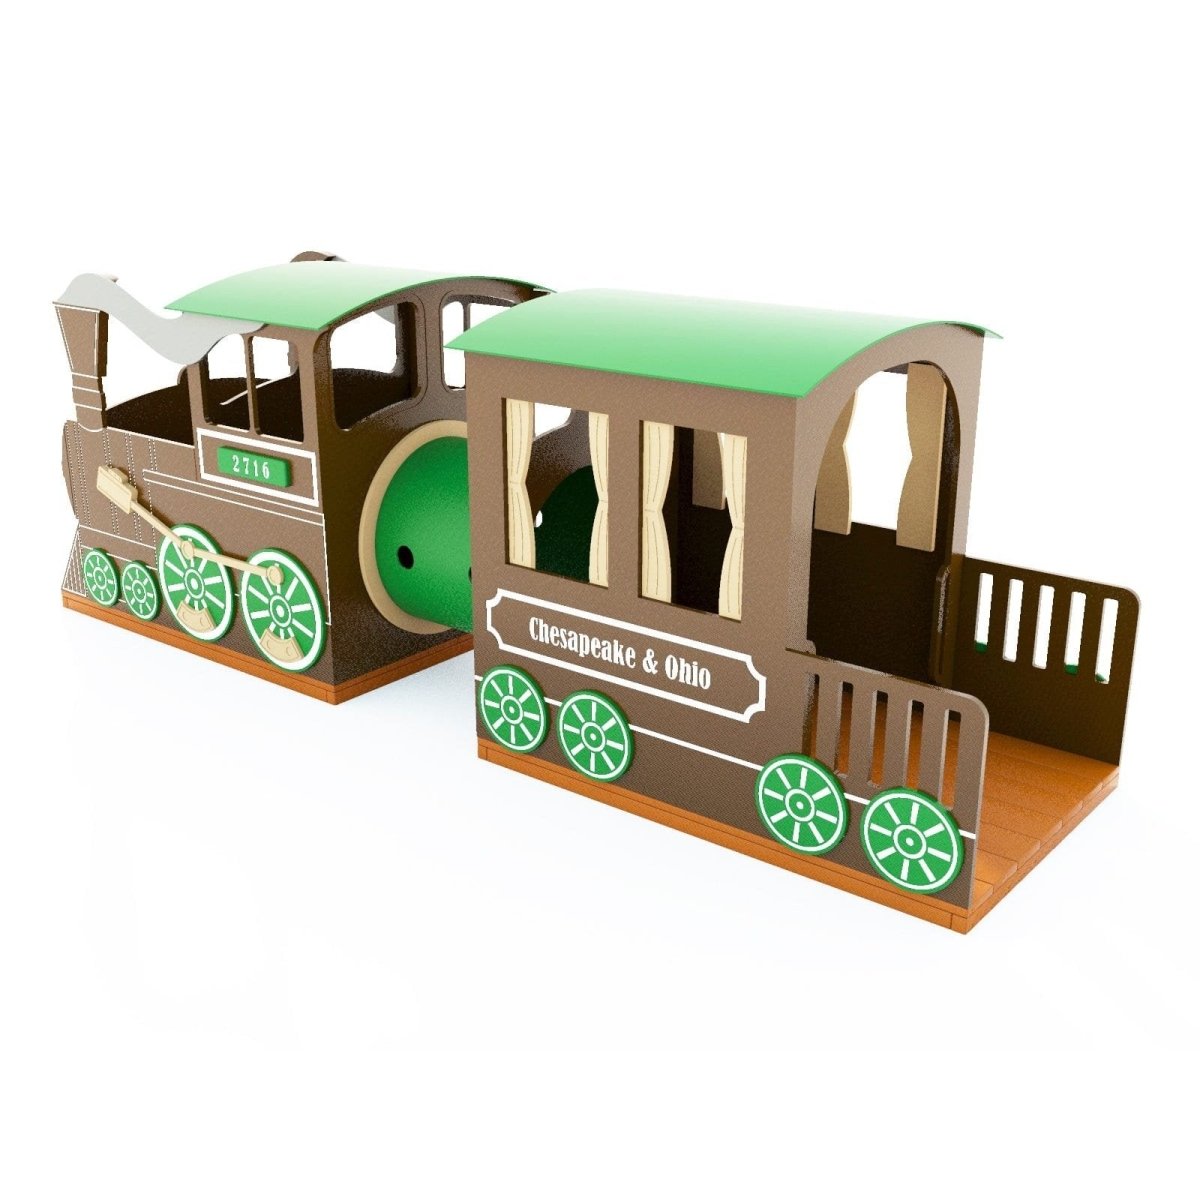 Toddler Steam Engine With Coach Playset - Infant Playground - Playtopia, Inc.